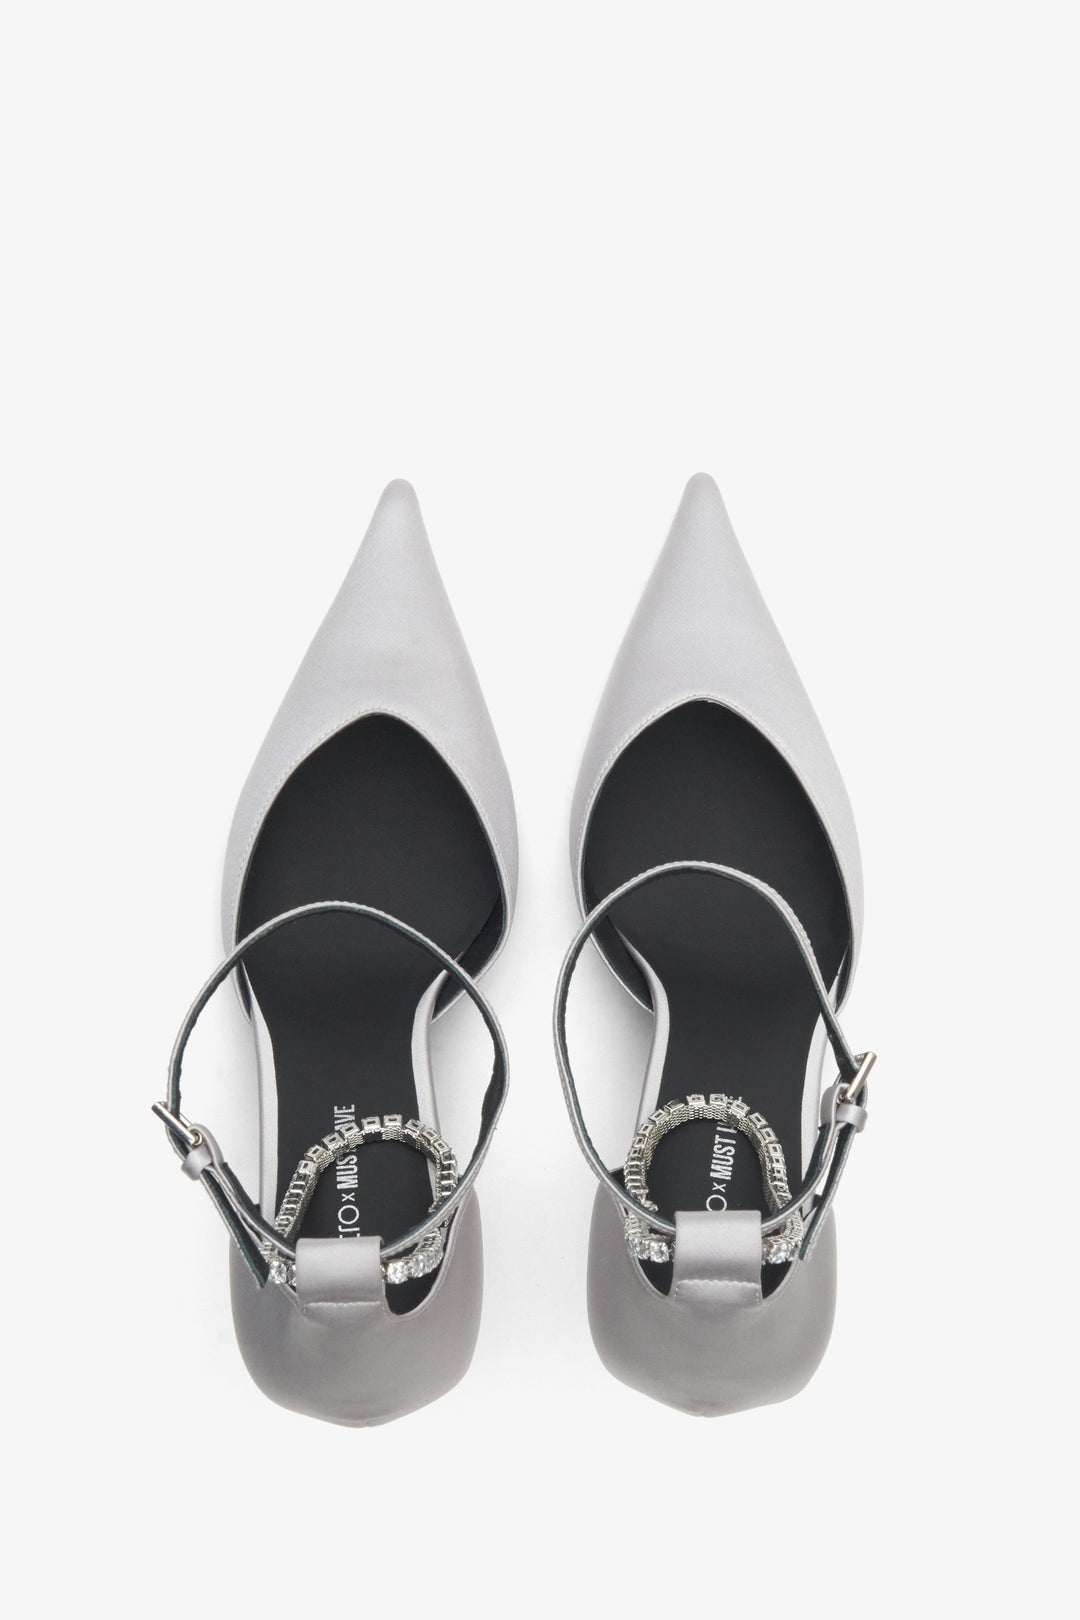 Women's pointed-toe pumps in grey with a crystal strap - top view presentation of the model.